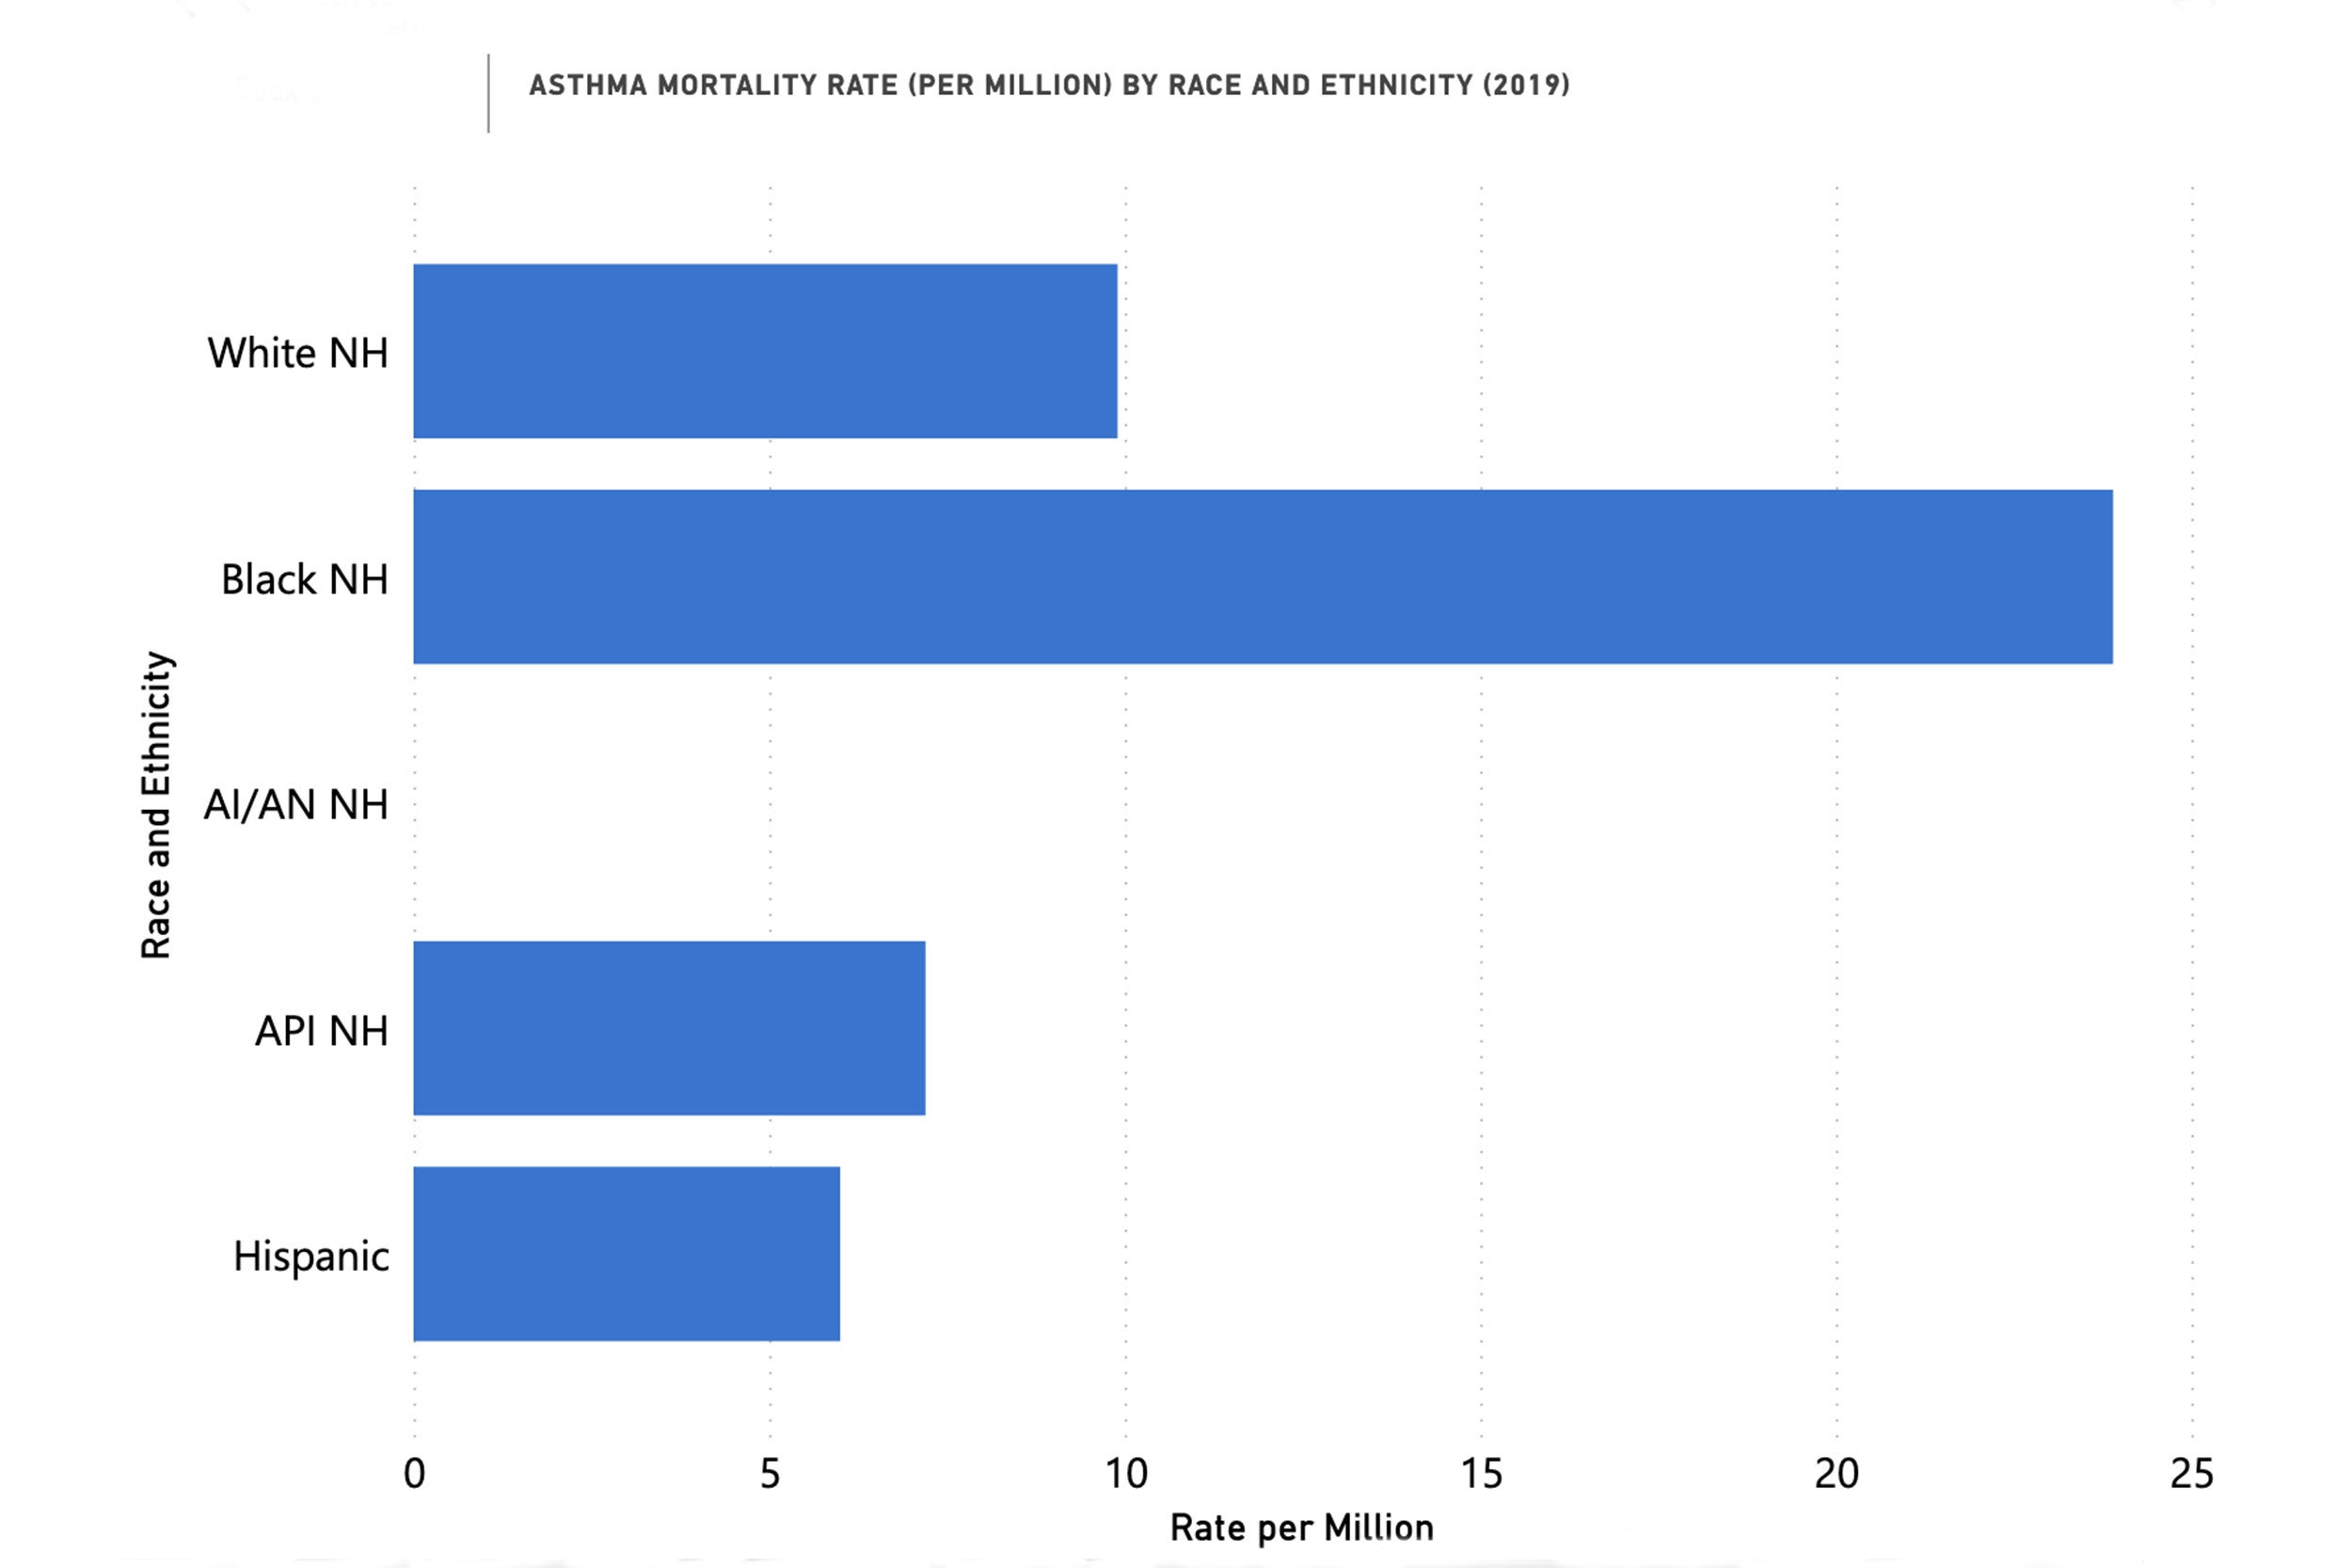 Graphic of Asthma Mortality Rate (per million) by Race and Ethnicity.